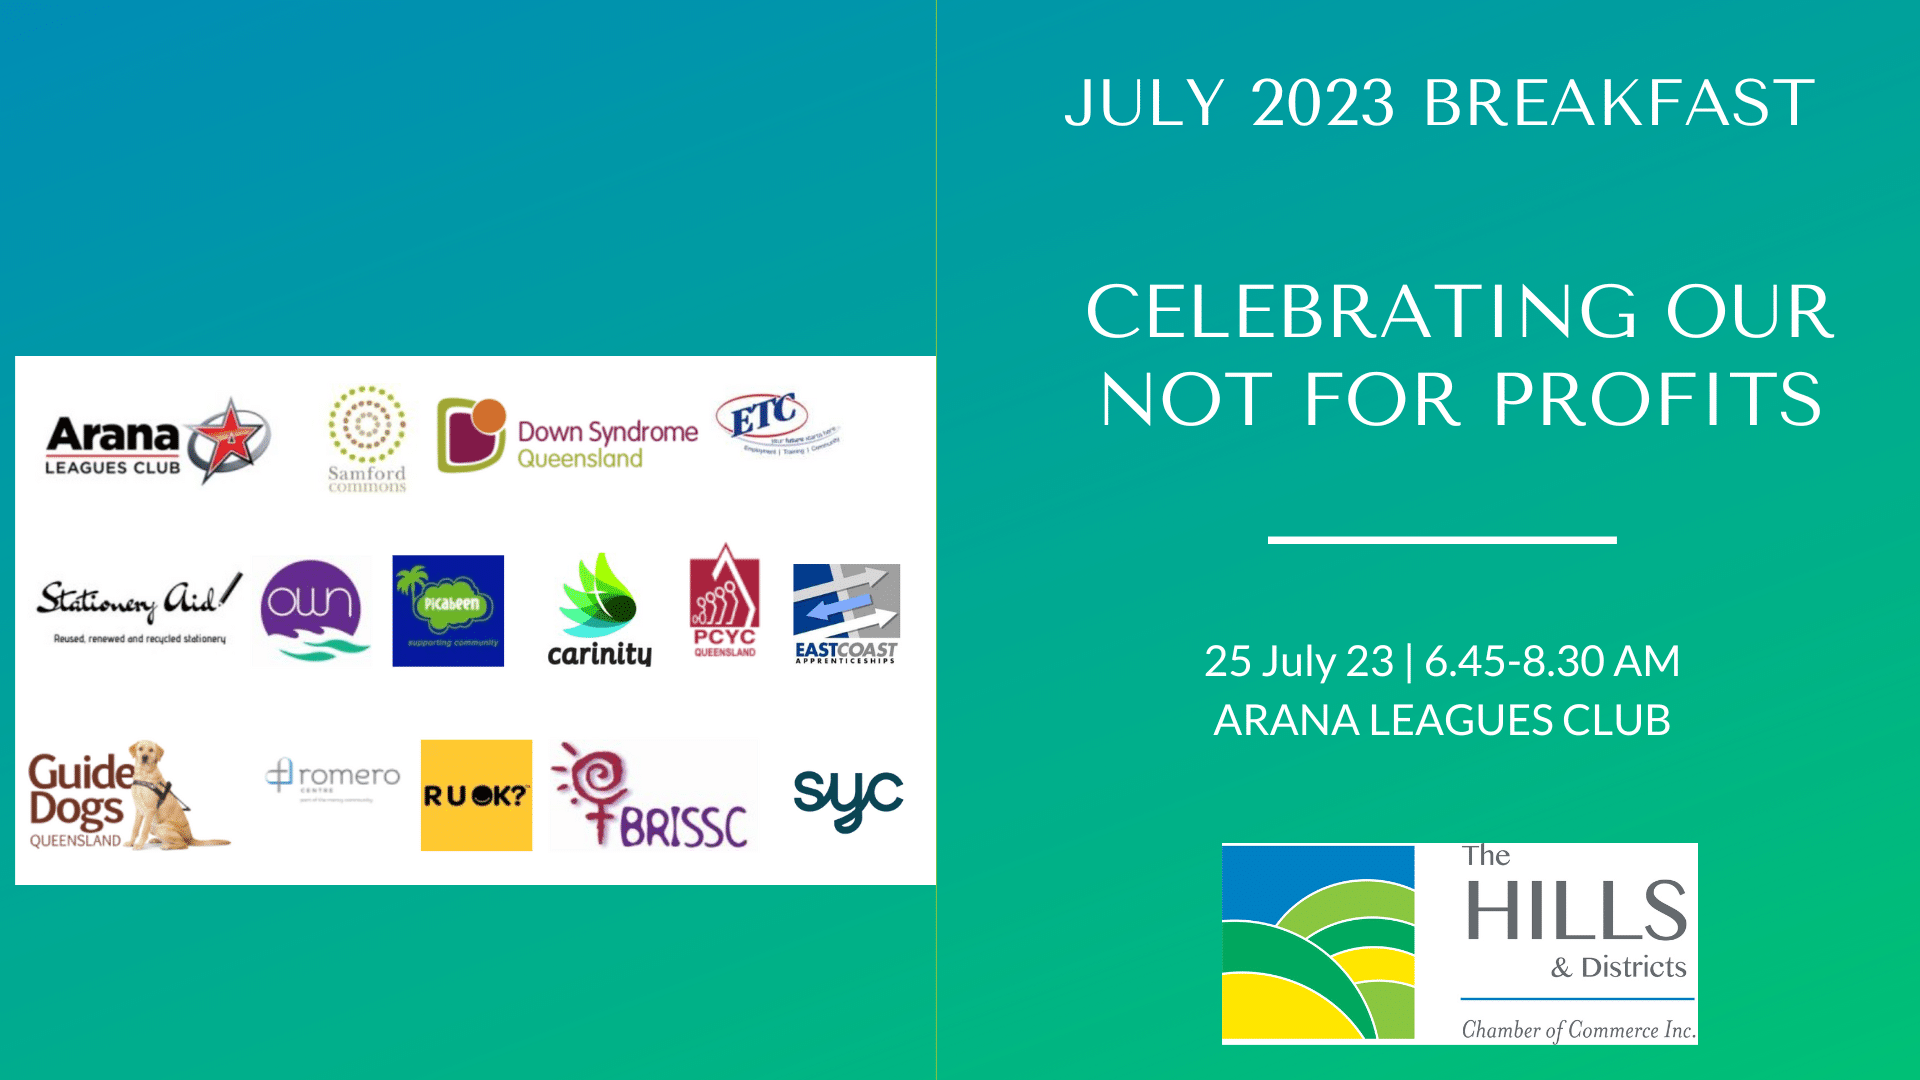 Breakfast Meeting » July 2023 Breakfast: Celebrating our Not-for-Profits